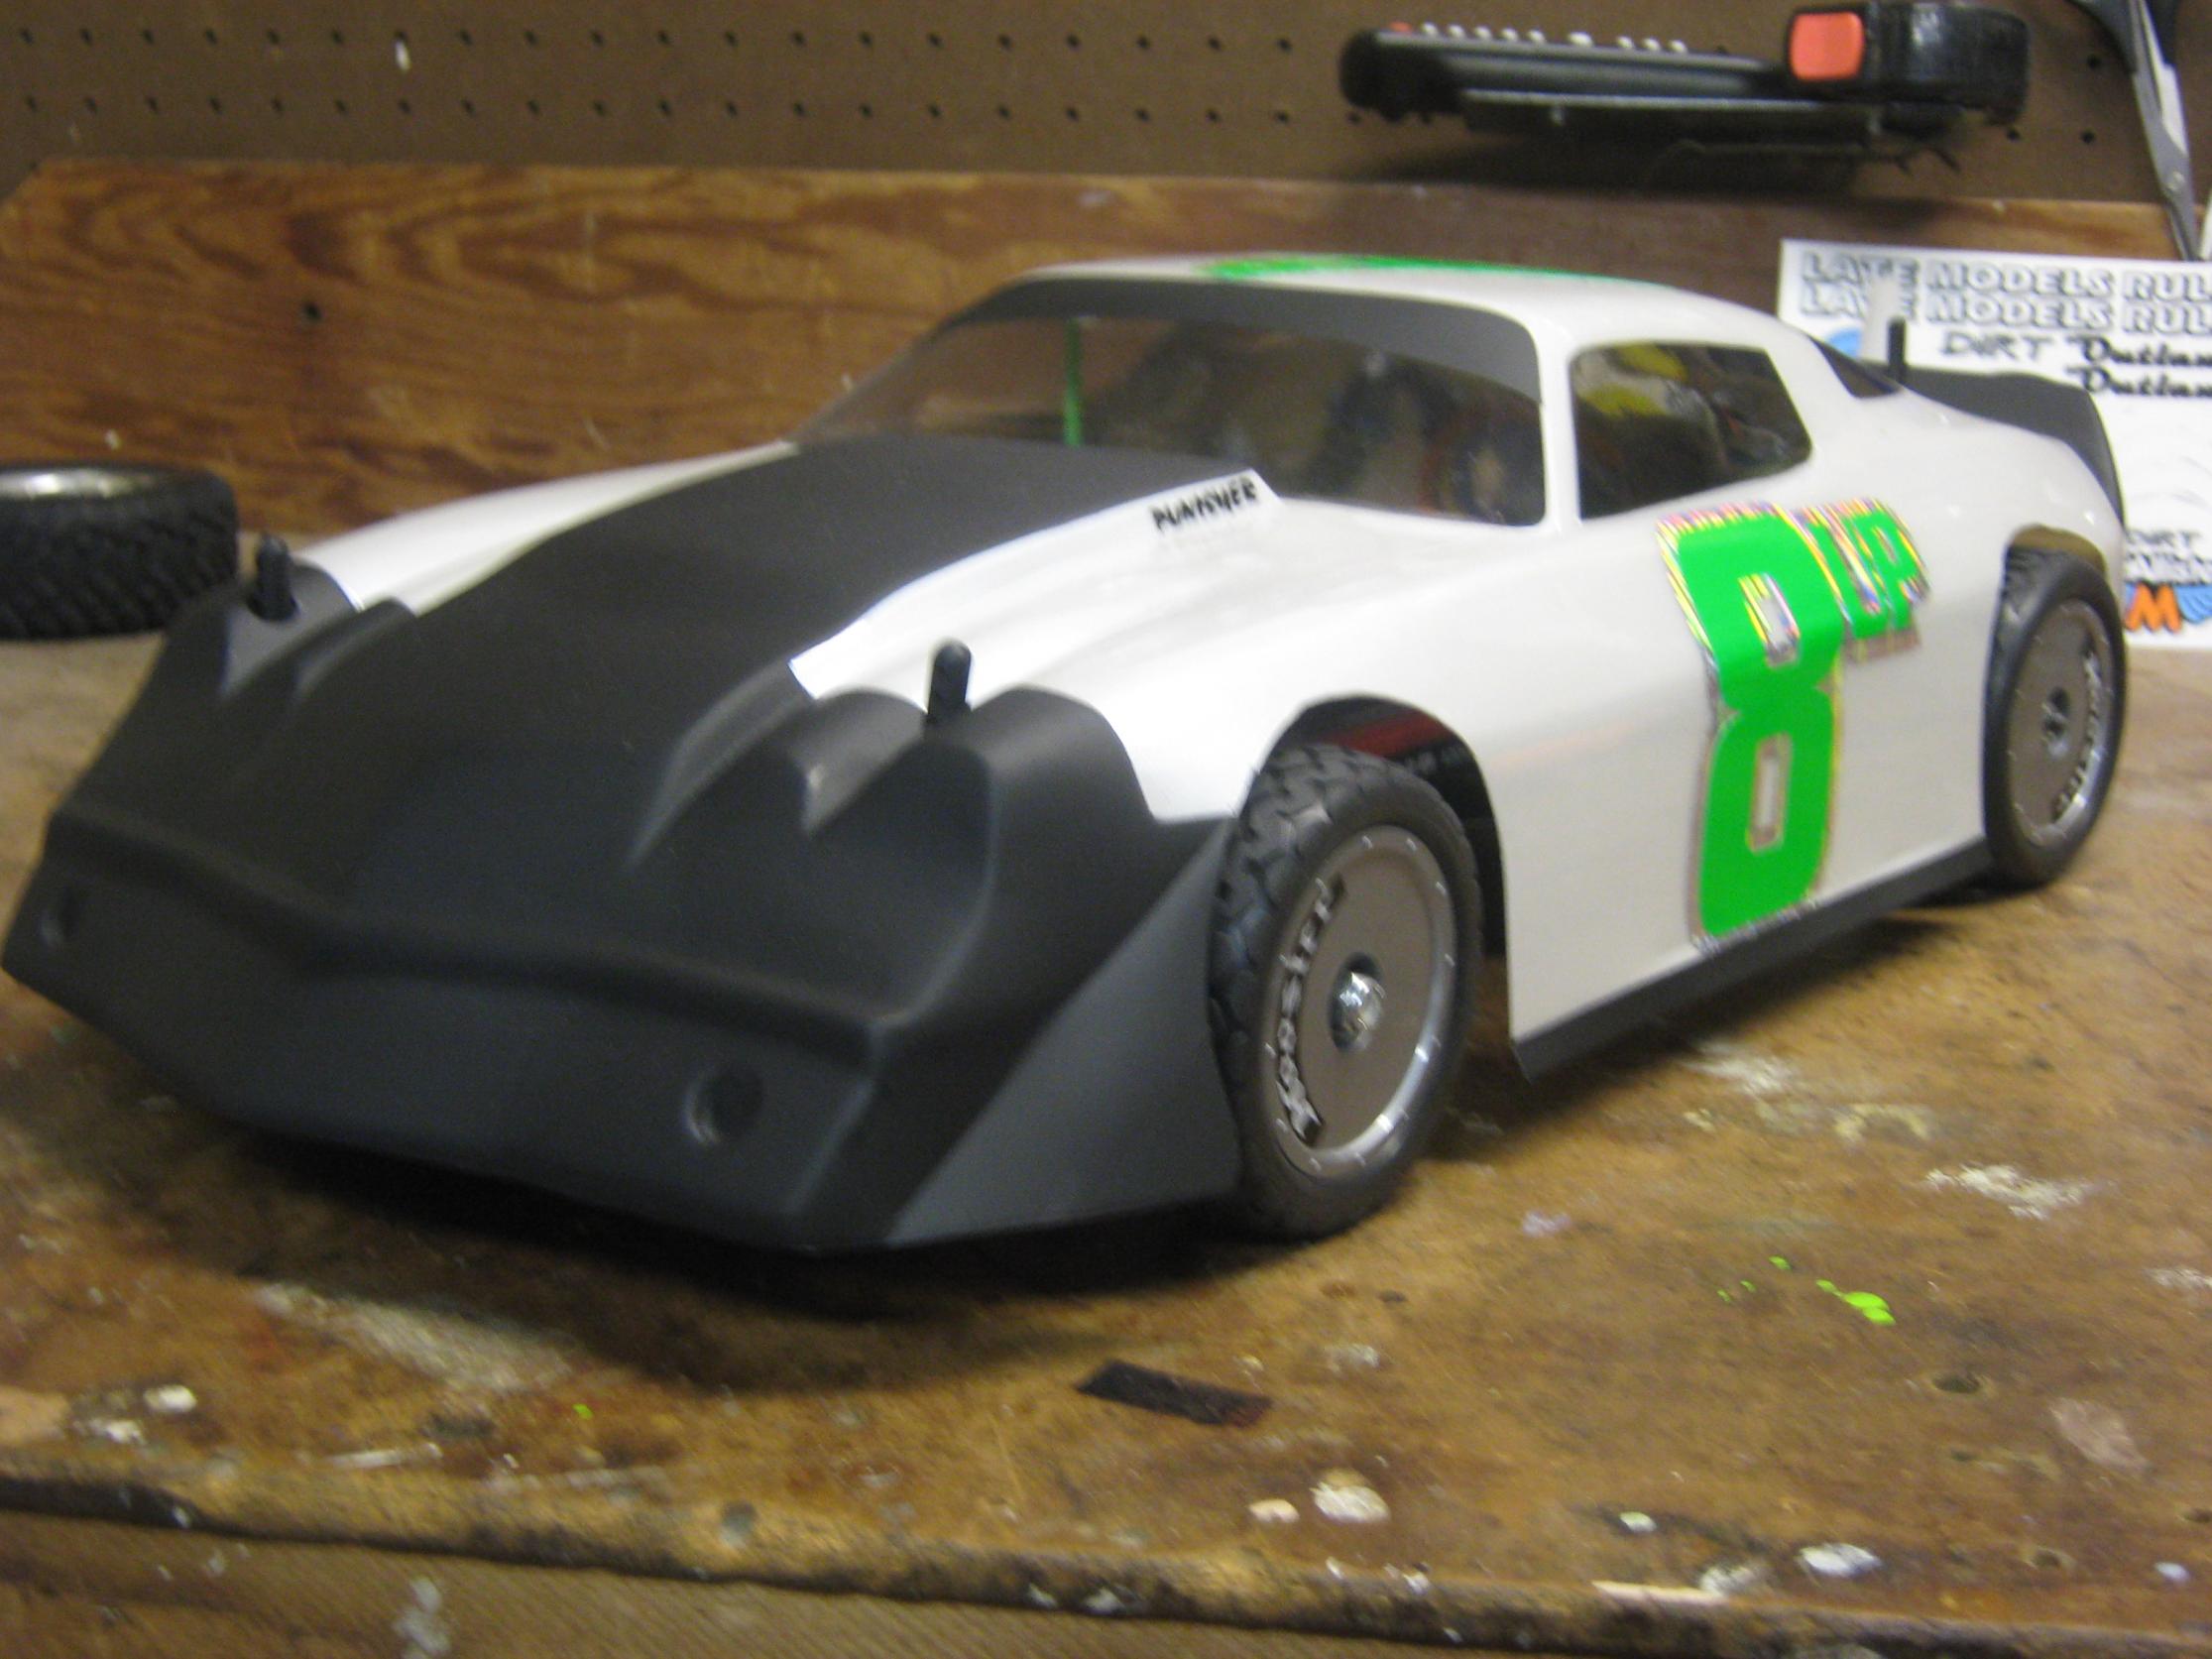 Bomber Dirt Oval Cars lets see some pictures - Page 3 - R/C Tech Forums